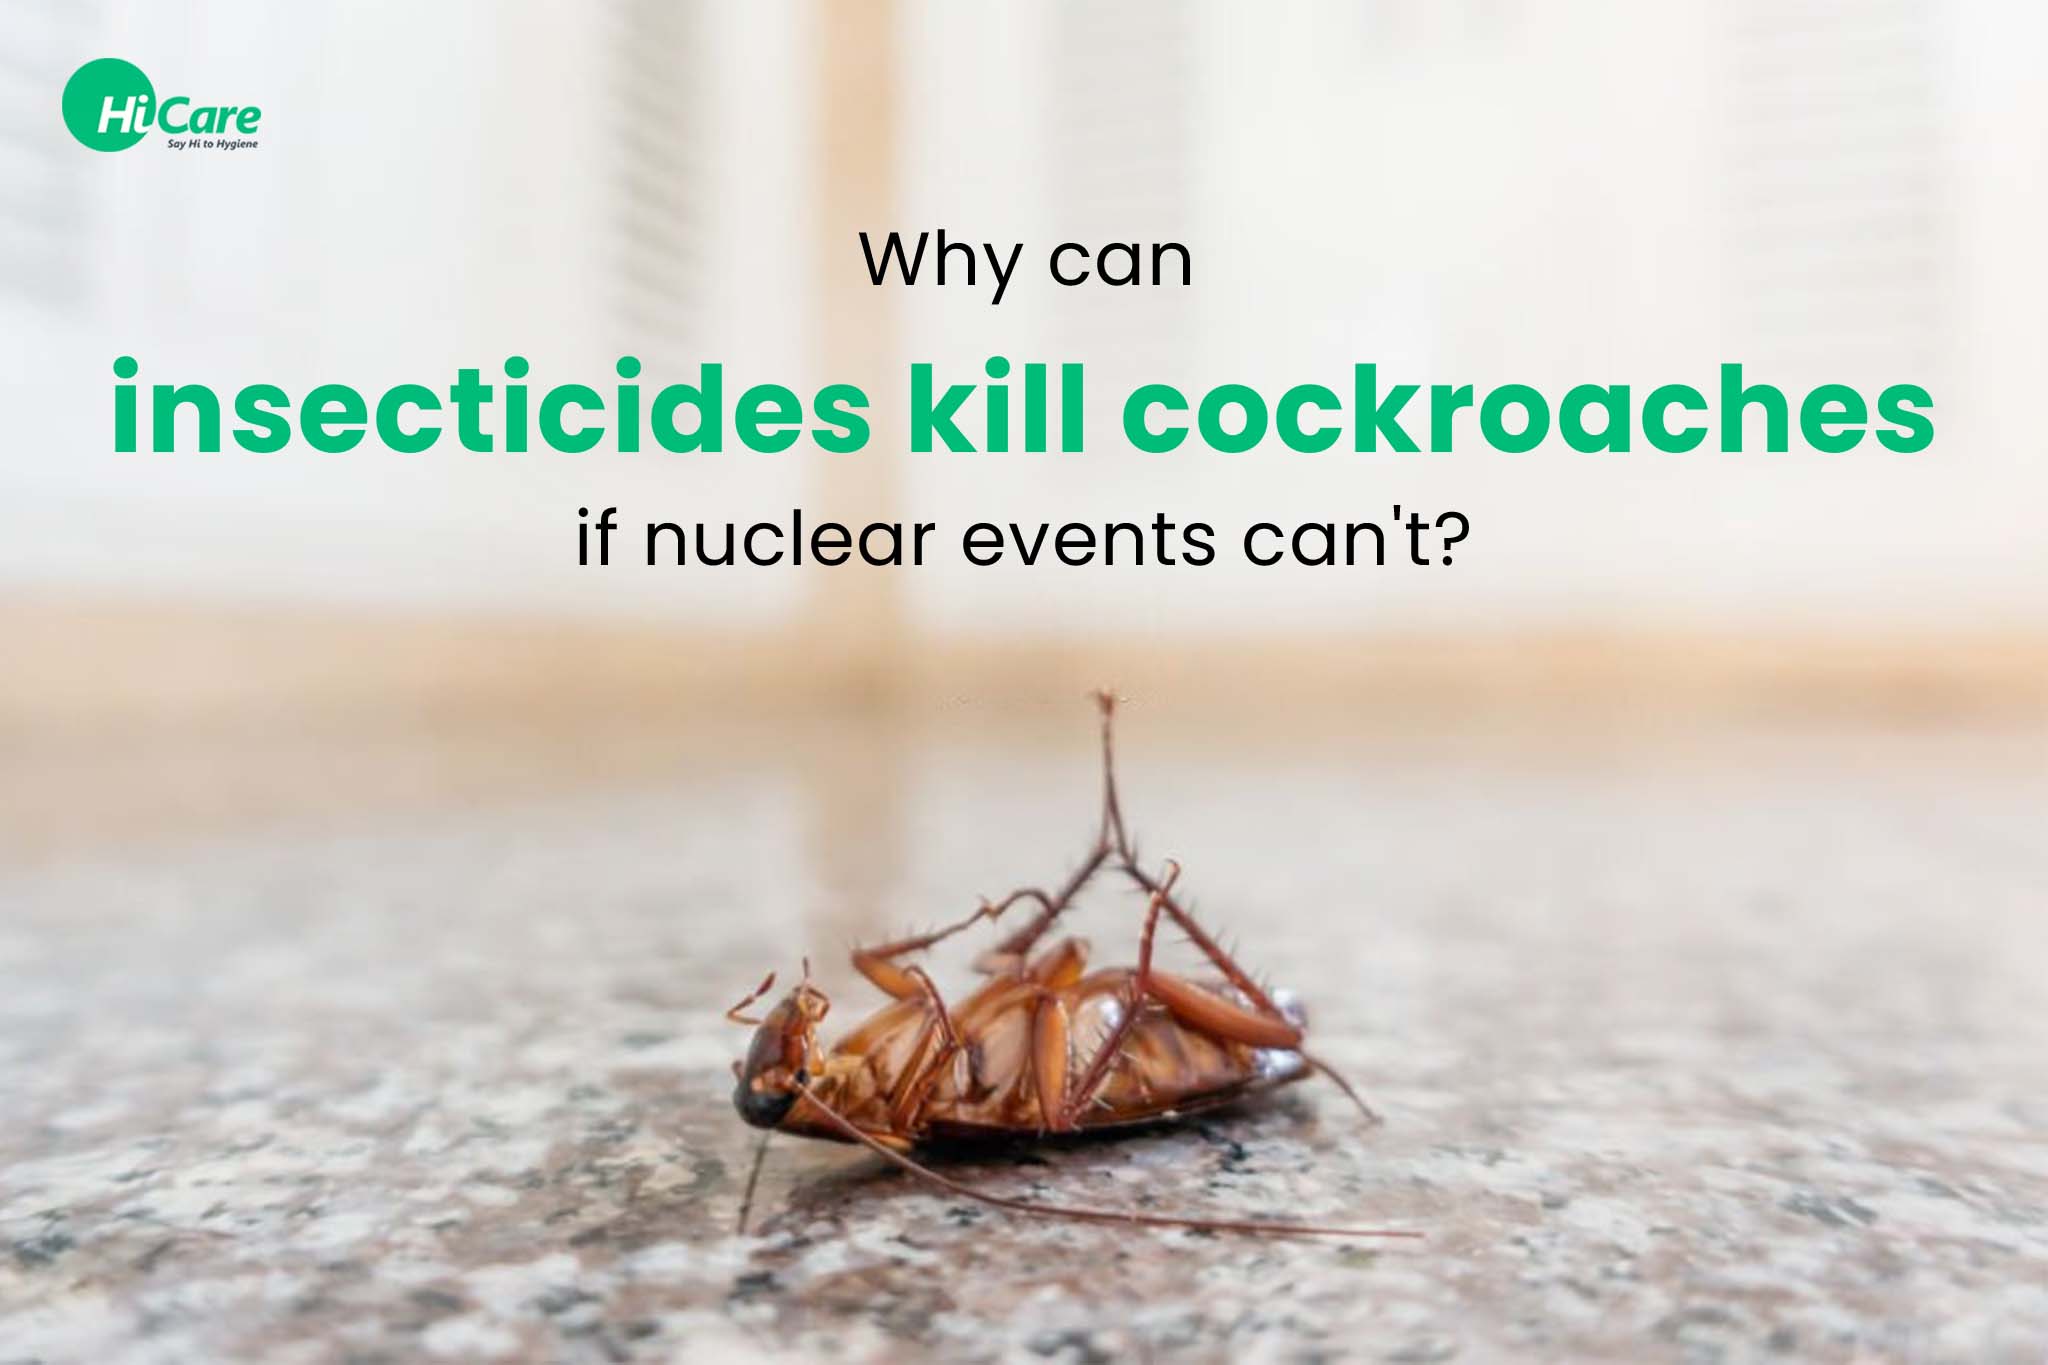 If Nuclear Events Can’t Kill Cockroaches, Why Can Insecticides?